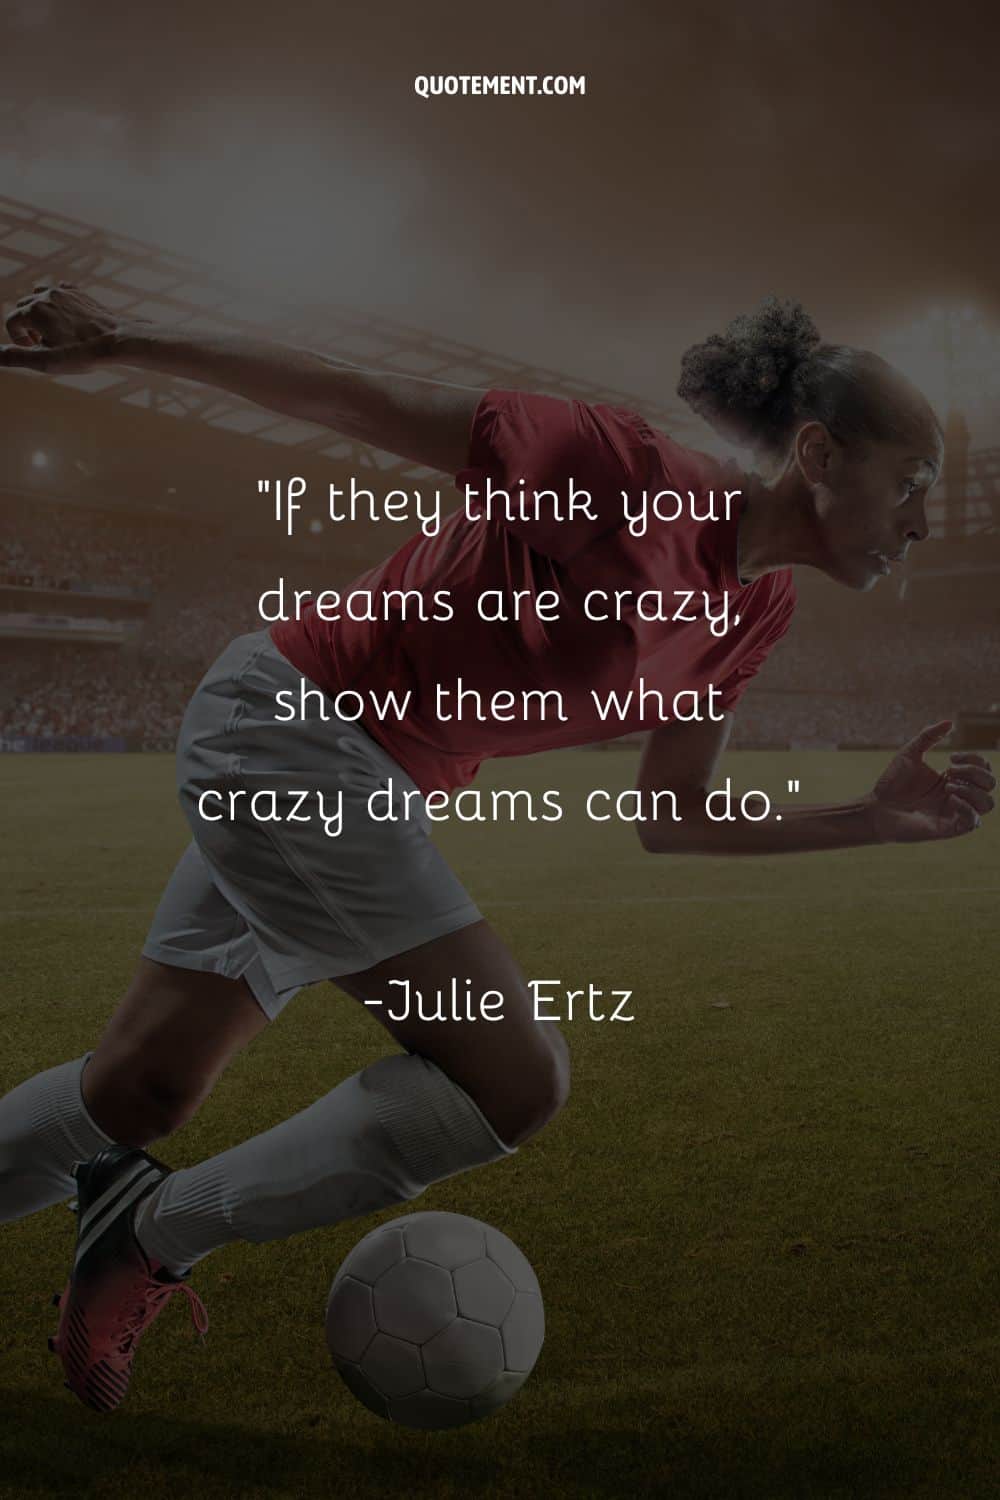 girl footballer's grace and control in focus representing positive soccer quote